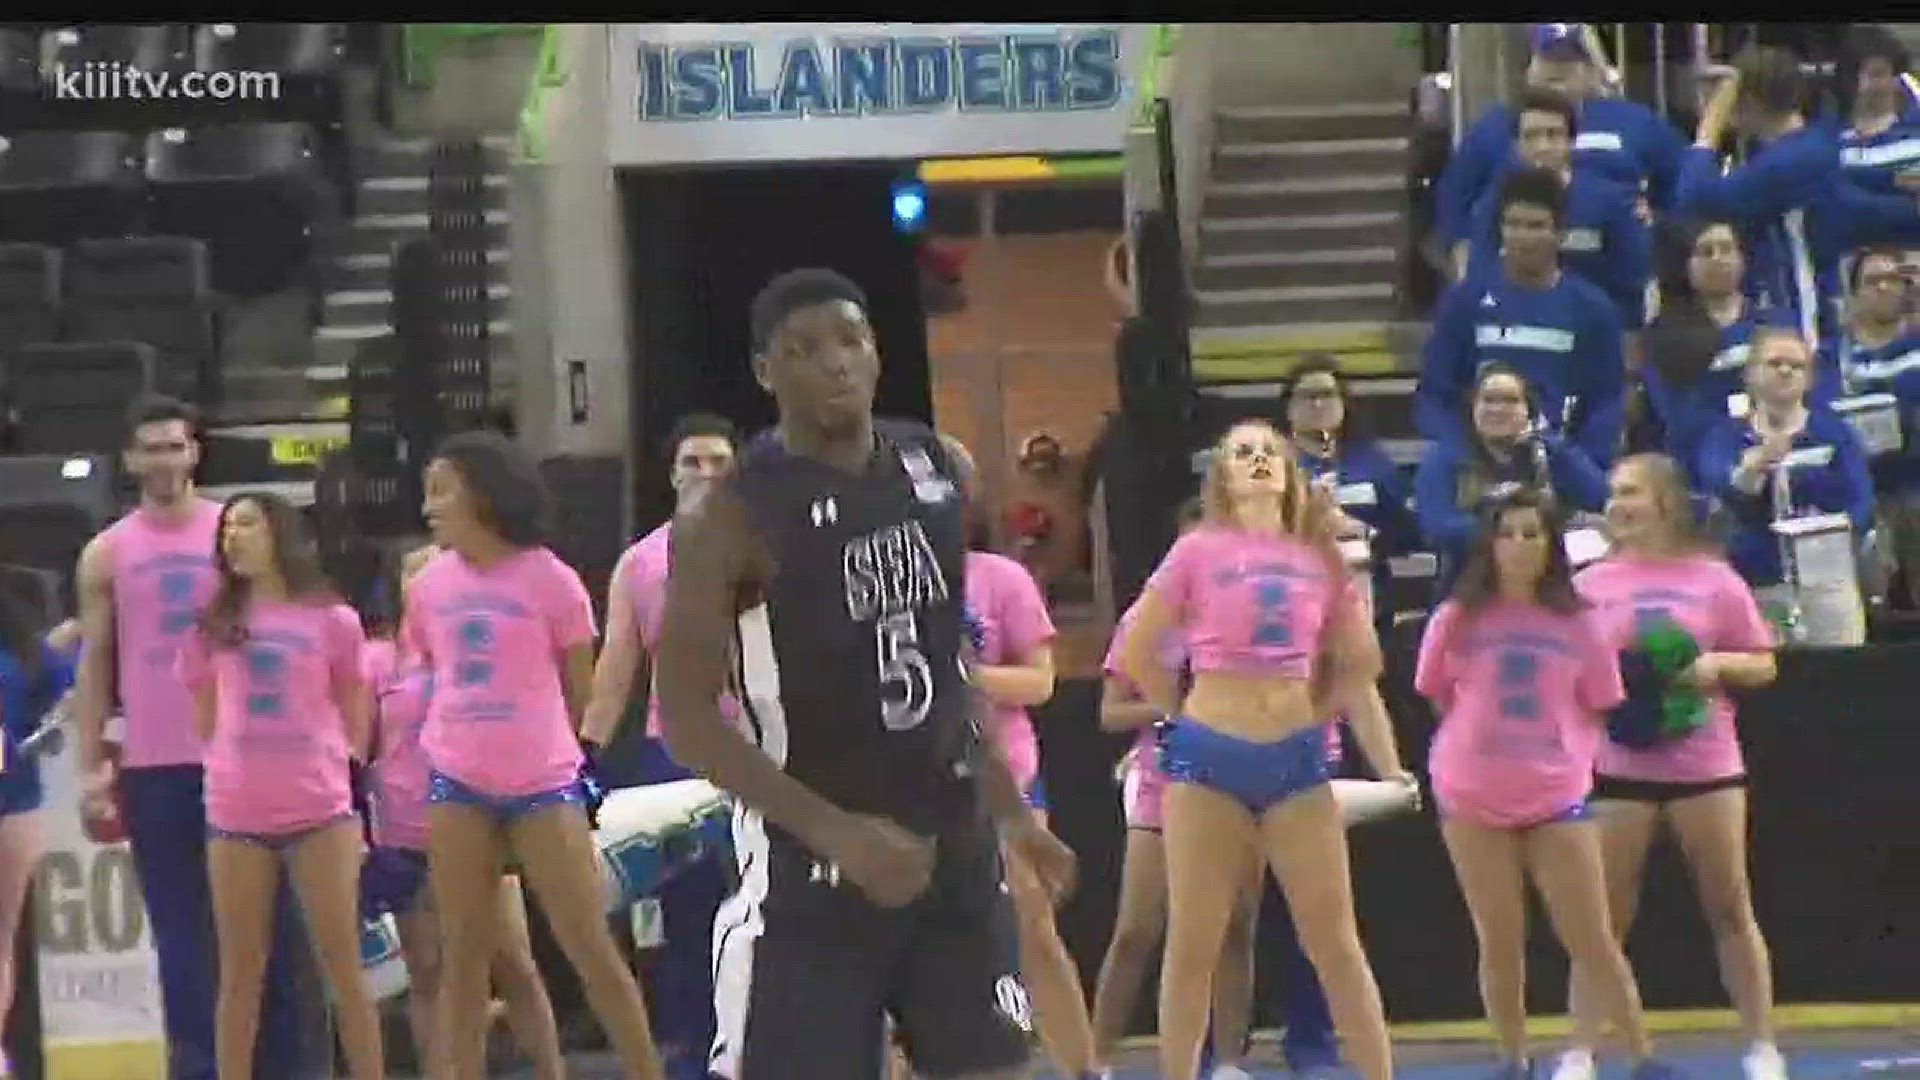 The Islanders fell to the Lumberjacks 87-68 as Shannon Bogues poured in 32 points for SFA.